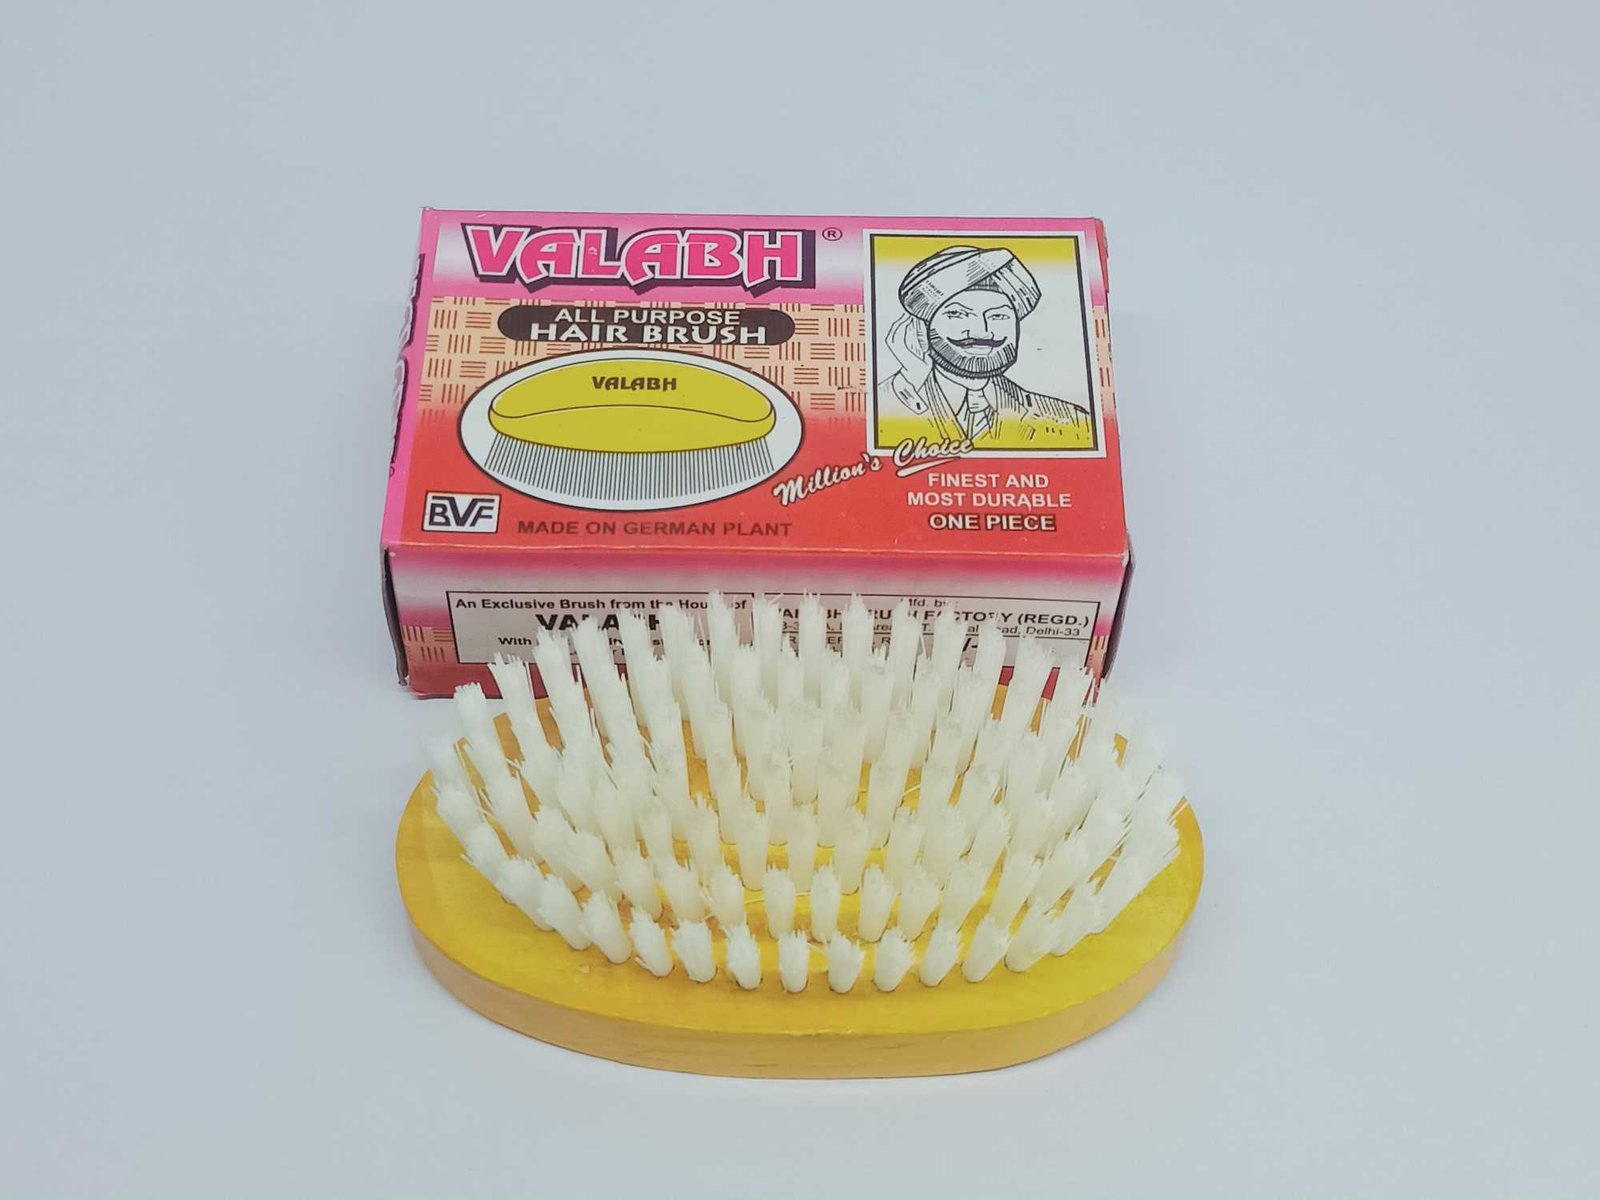 Valabh All Purpose Hair Brush Made in German Plant, No. 350